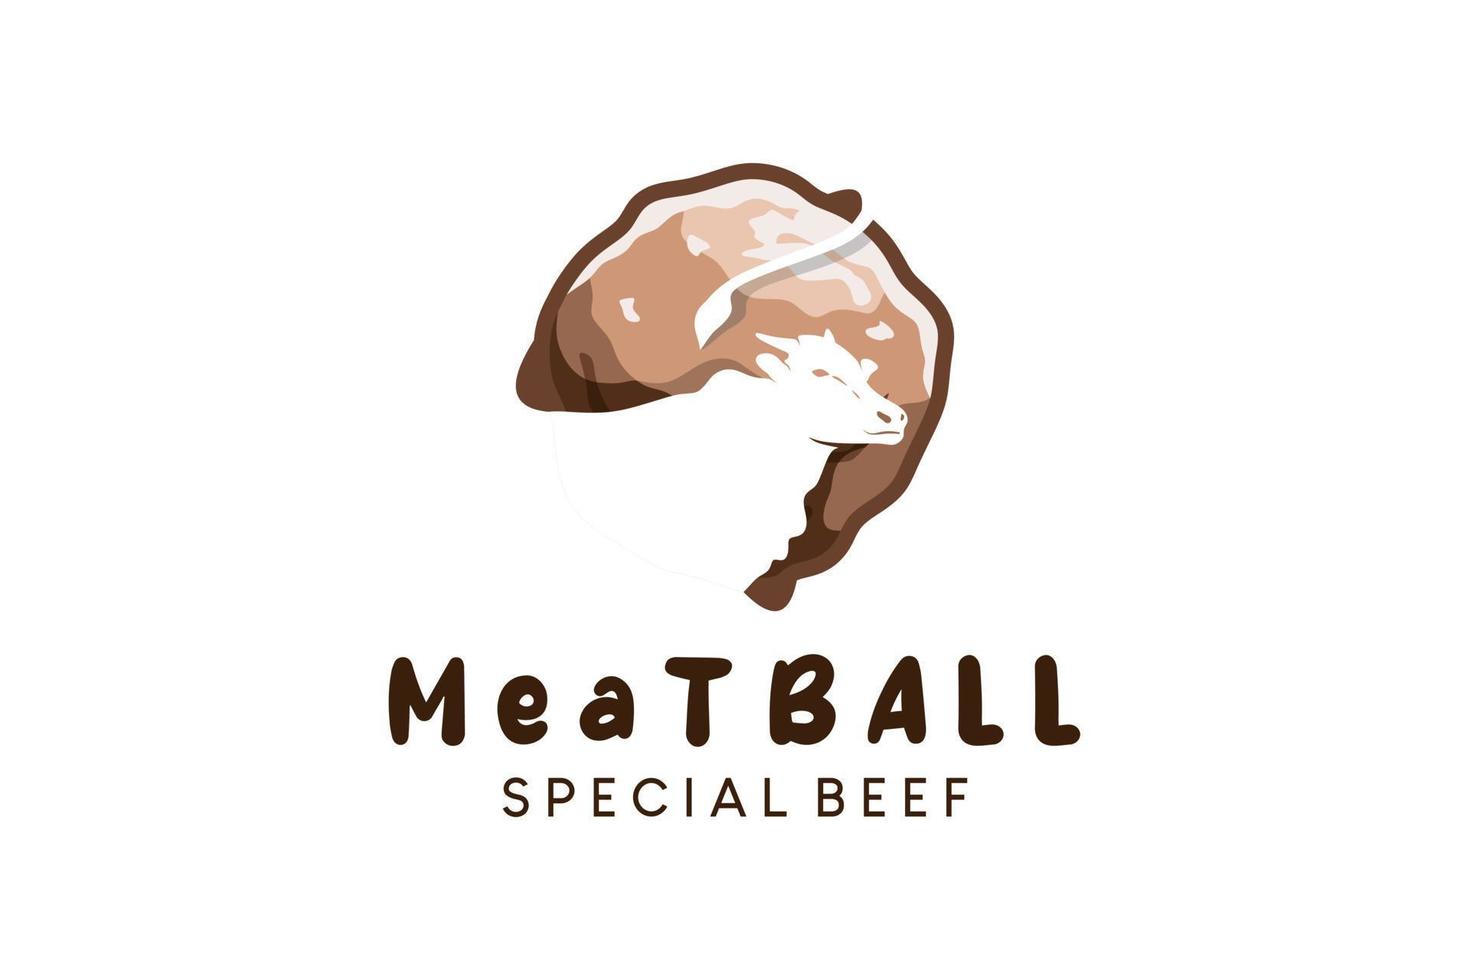 Food logo design, beef meatball logo with creative negative space style vector